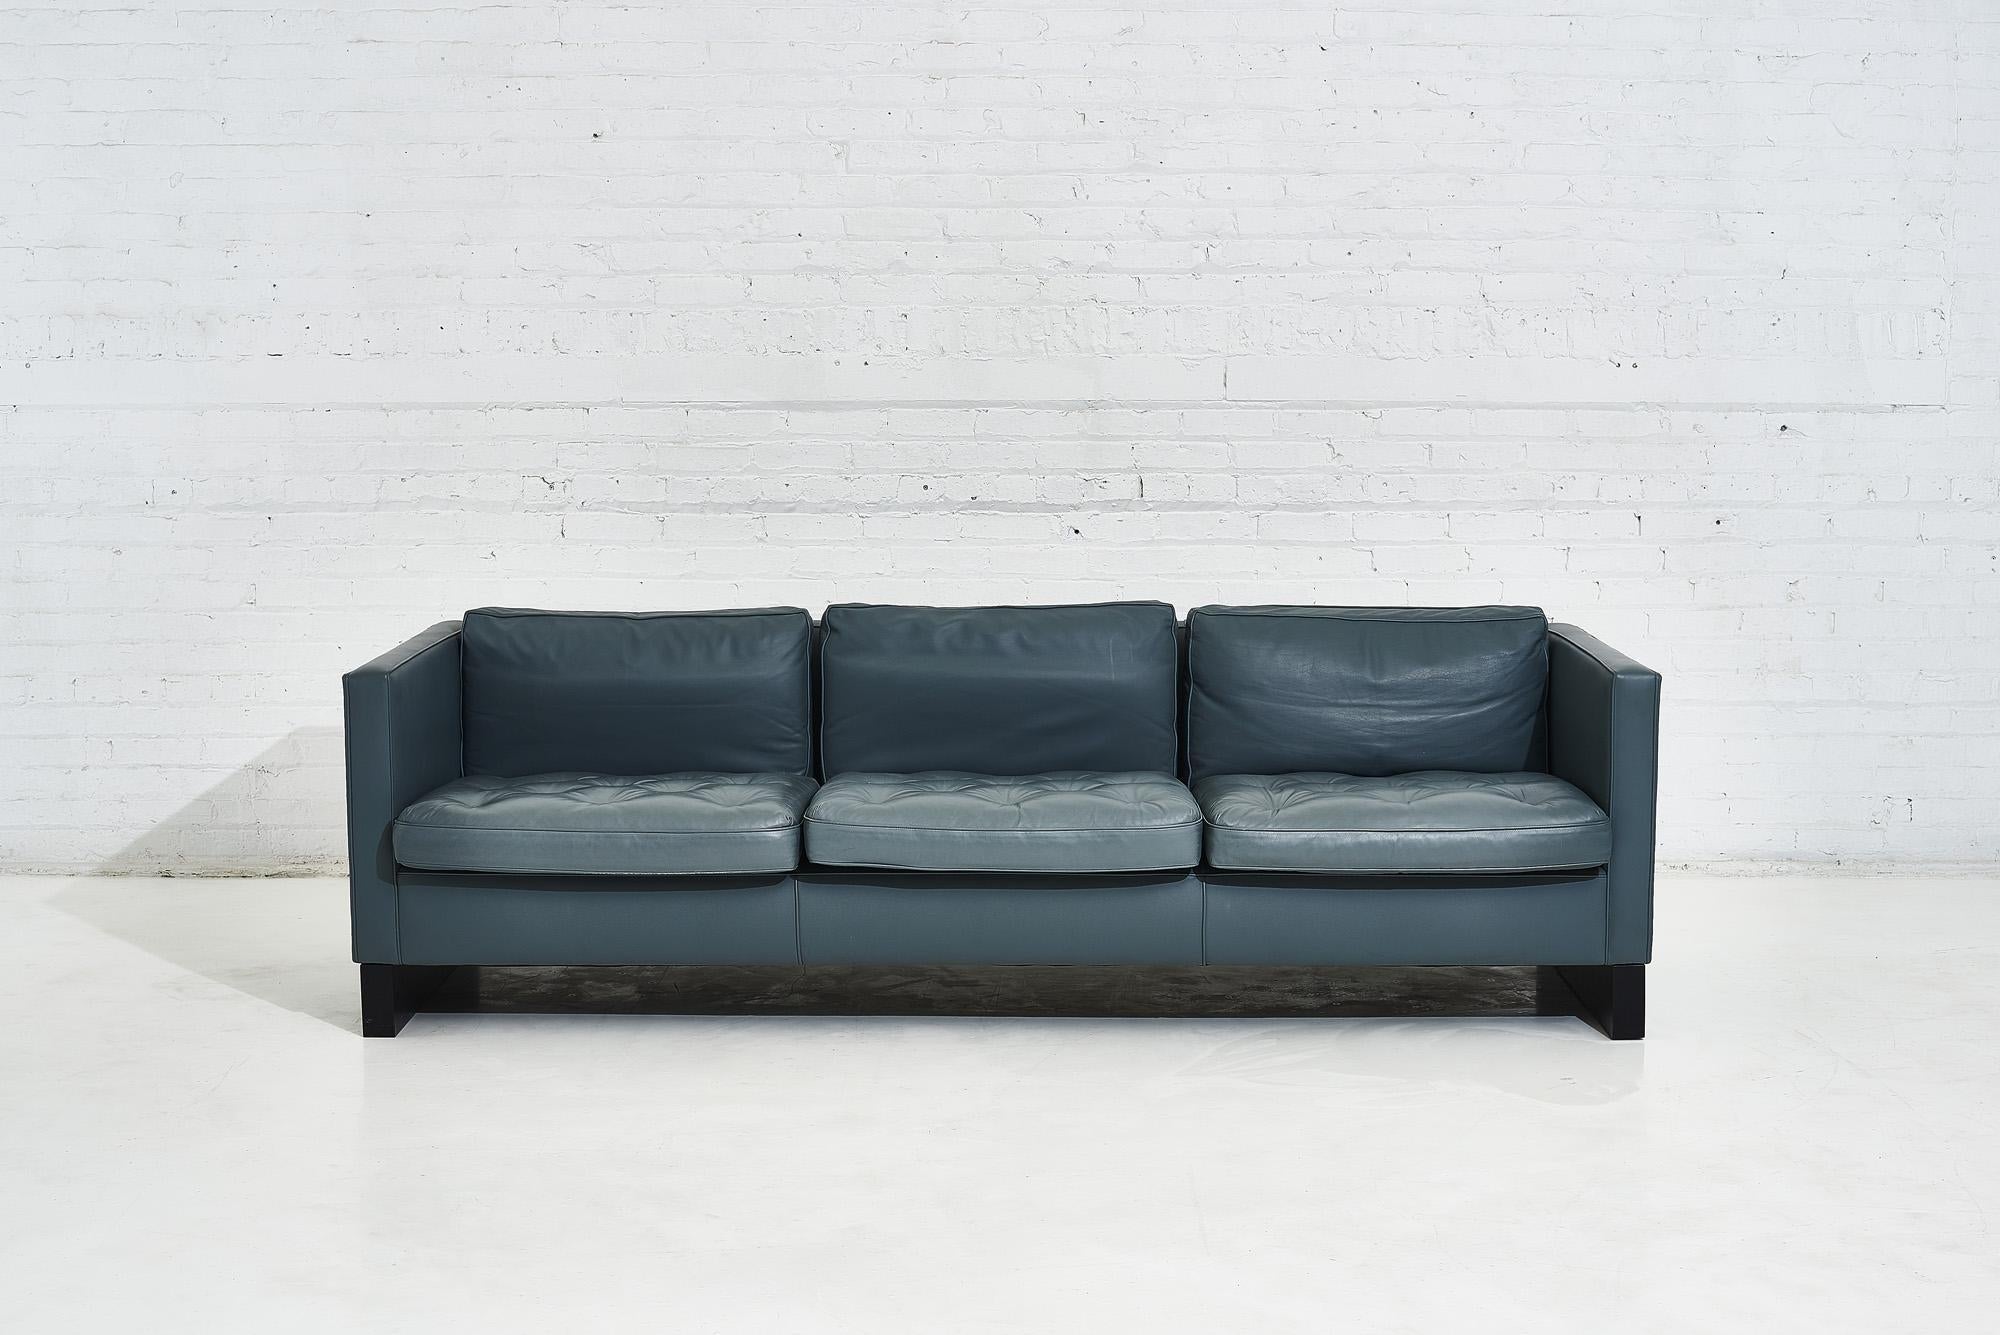 Blue leather sofa, Ludwig Mies van der Rohe, designed by Mies in Germany, 1930. Sofa was later produced by Interior Crafts, 1980’s.